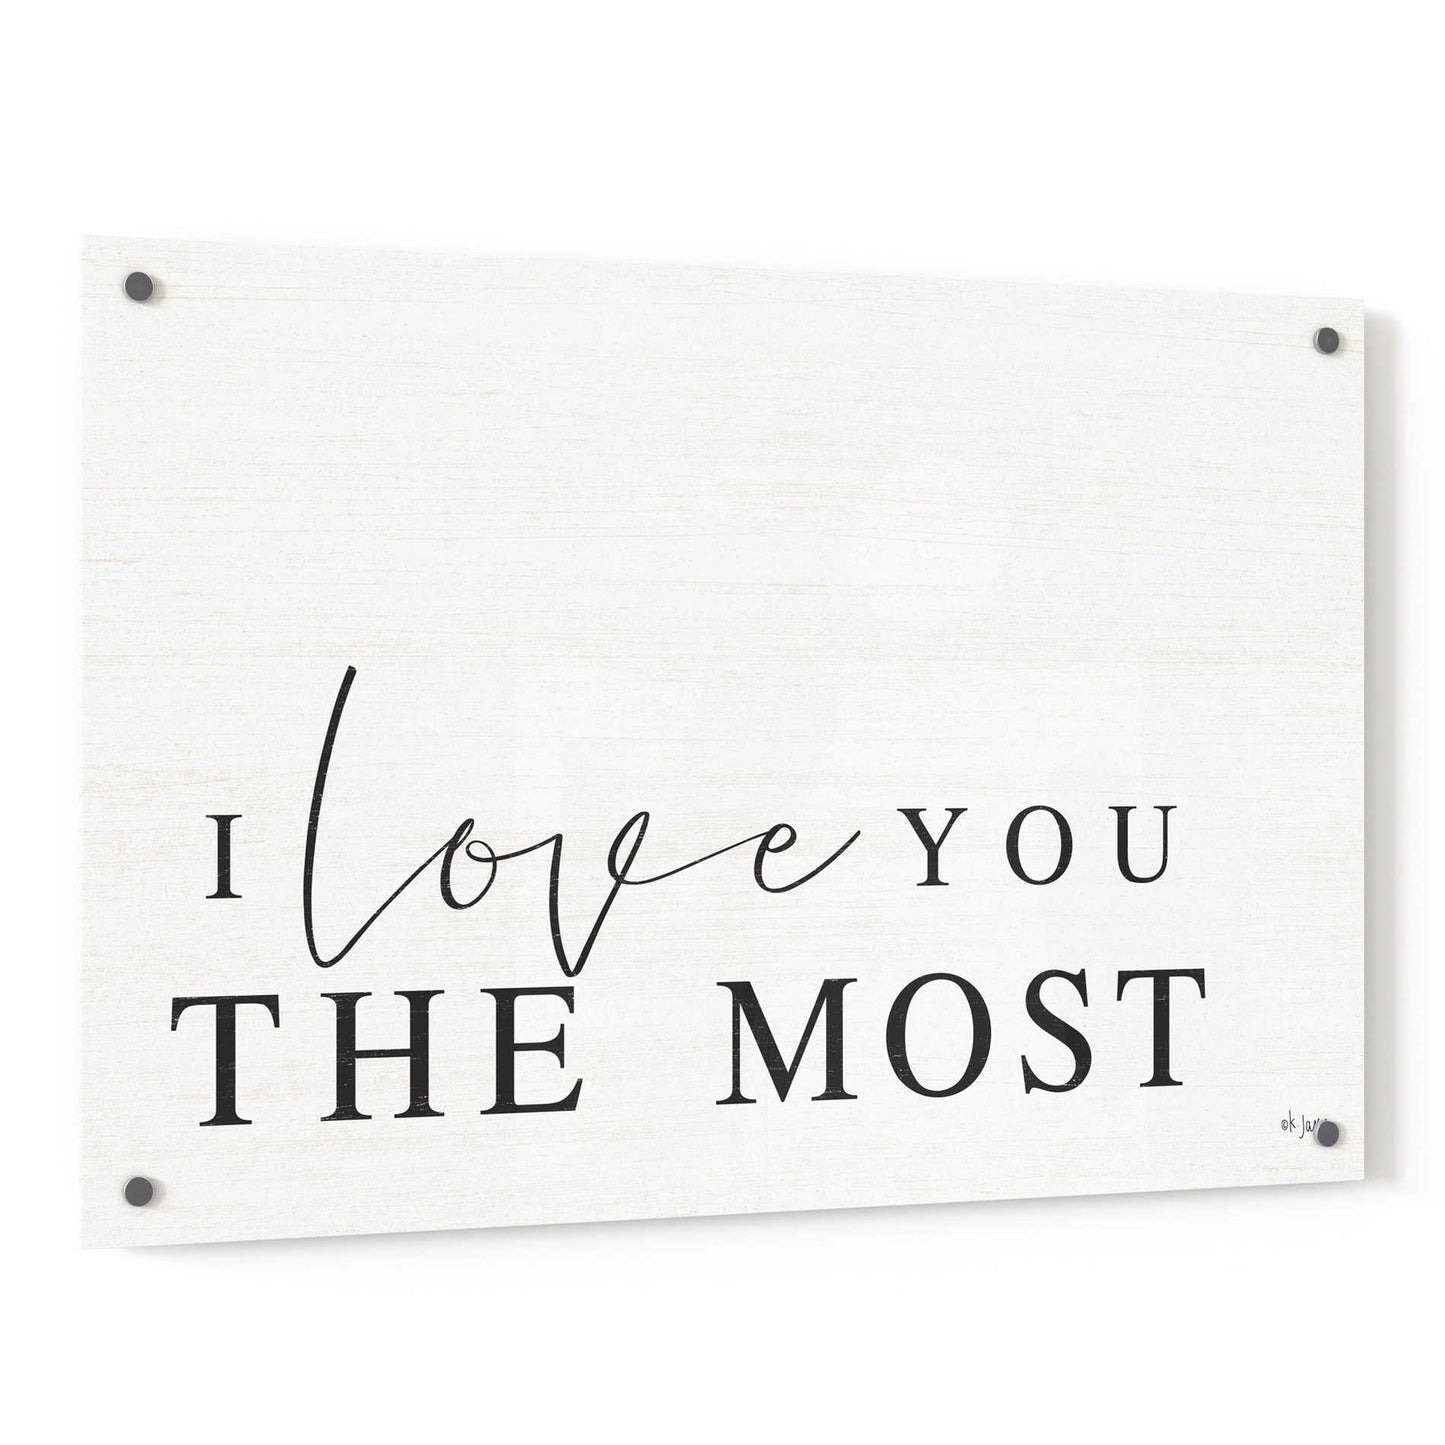 Epic Art 'I Love You the Most' by Jaxn Blvd, Acrylic Glass Wall Art,36x24